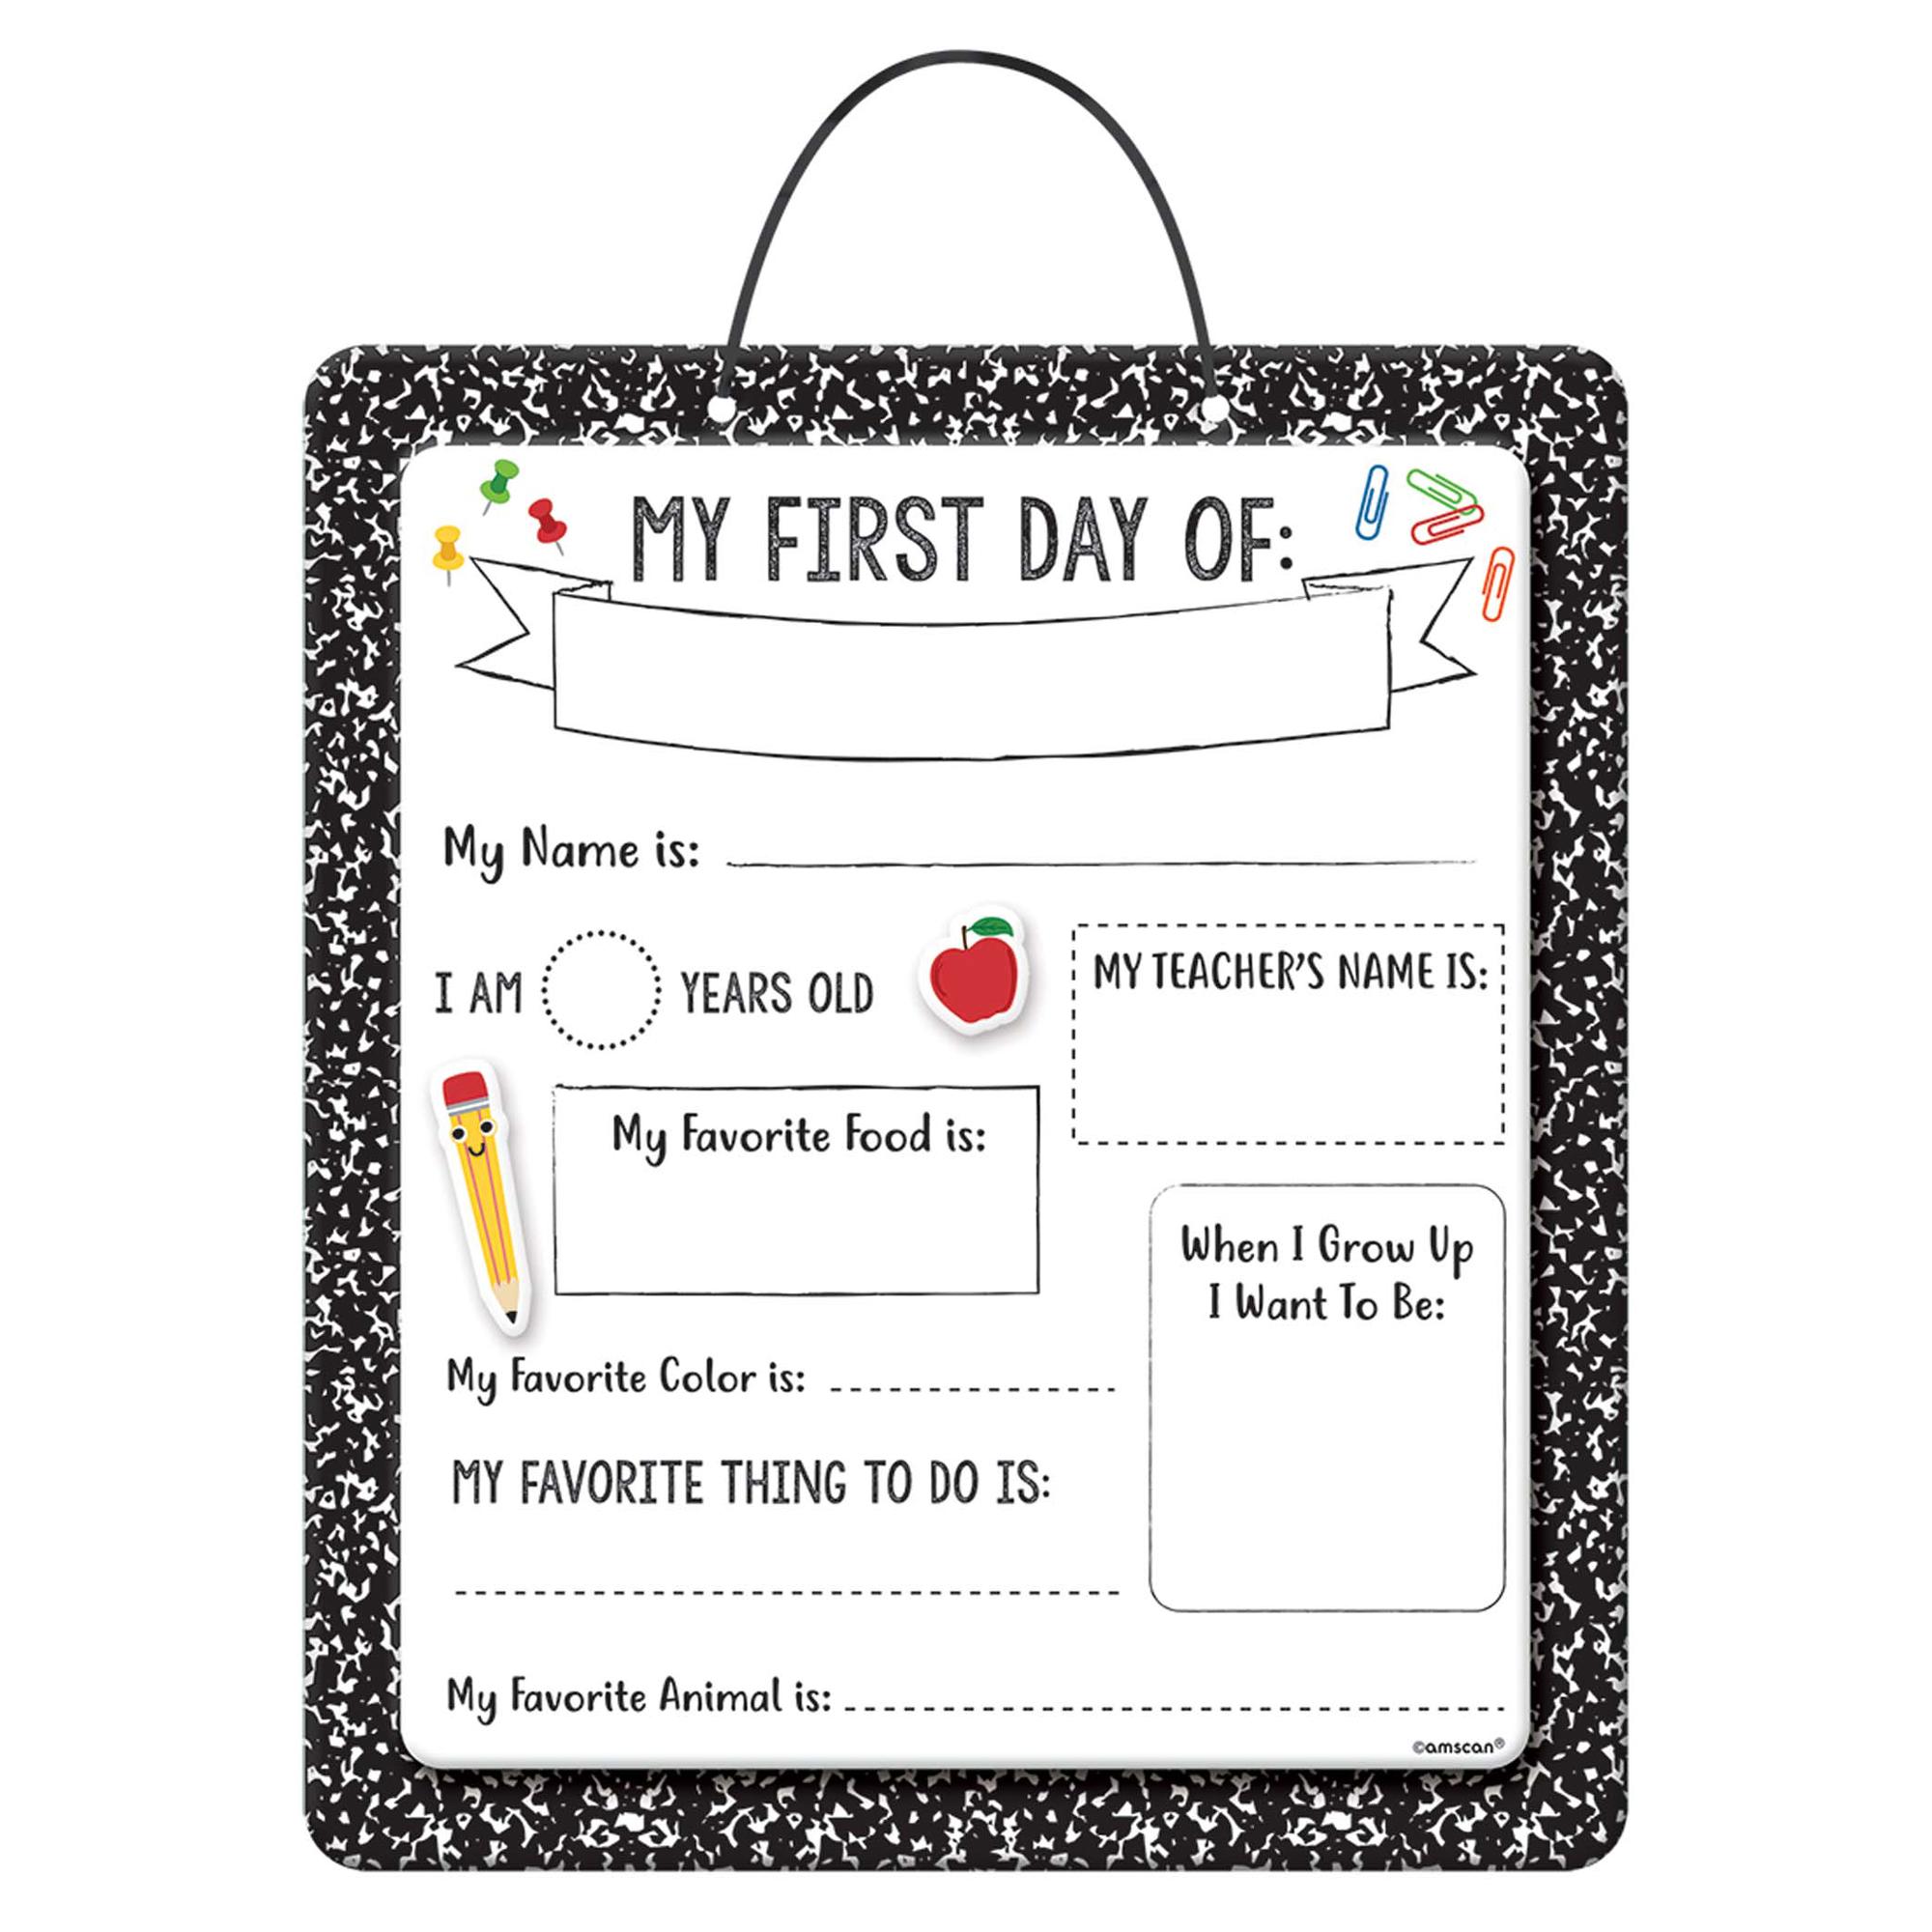 My First Day Of School Photo Prop Party Accessories - Party Centre